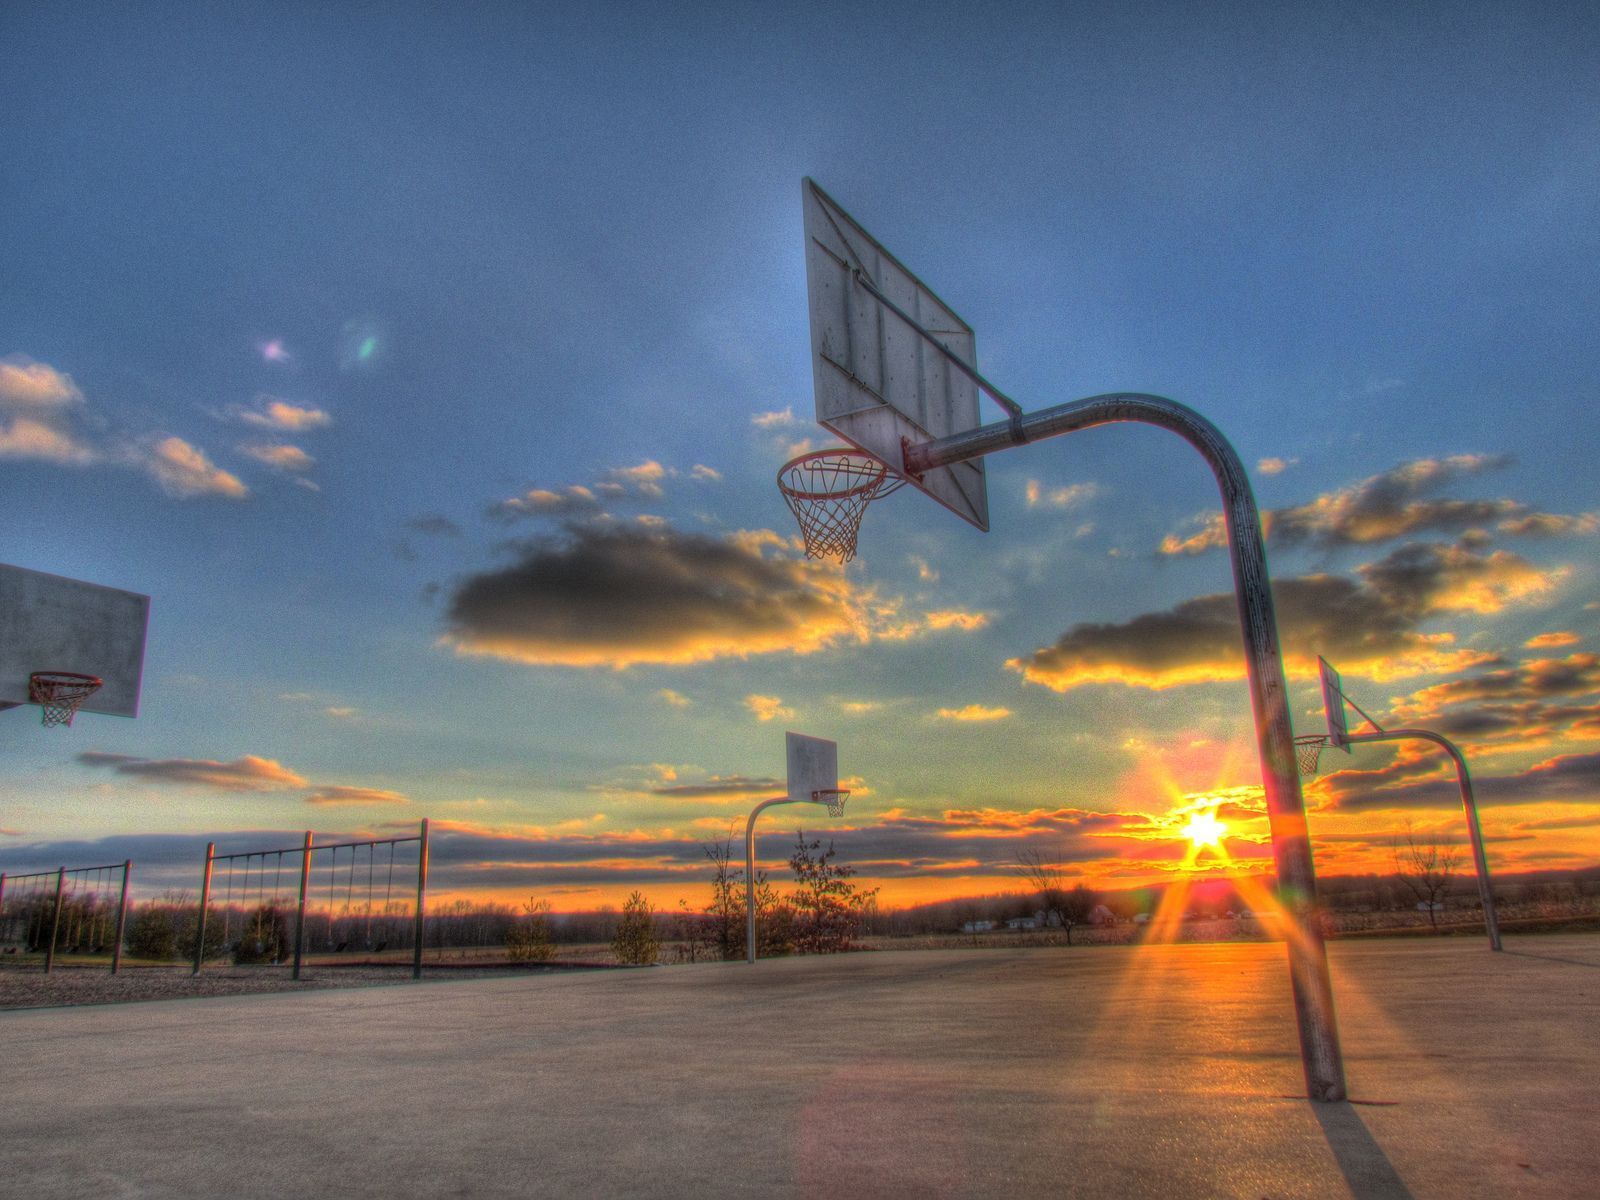 A basketball hoop with the sun setting in the background. - Basketball